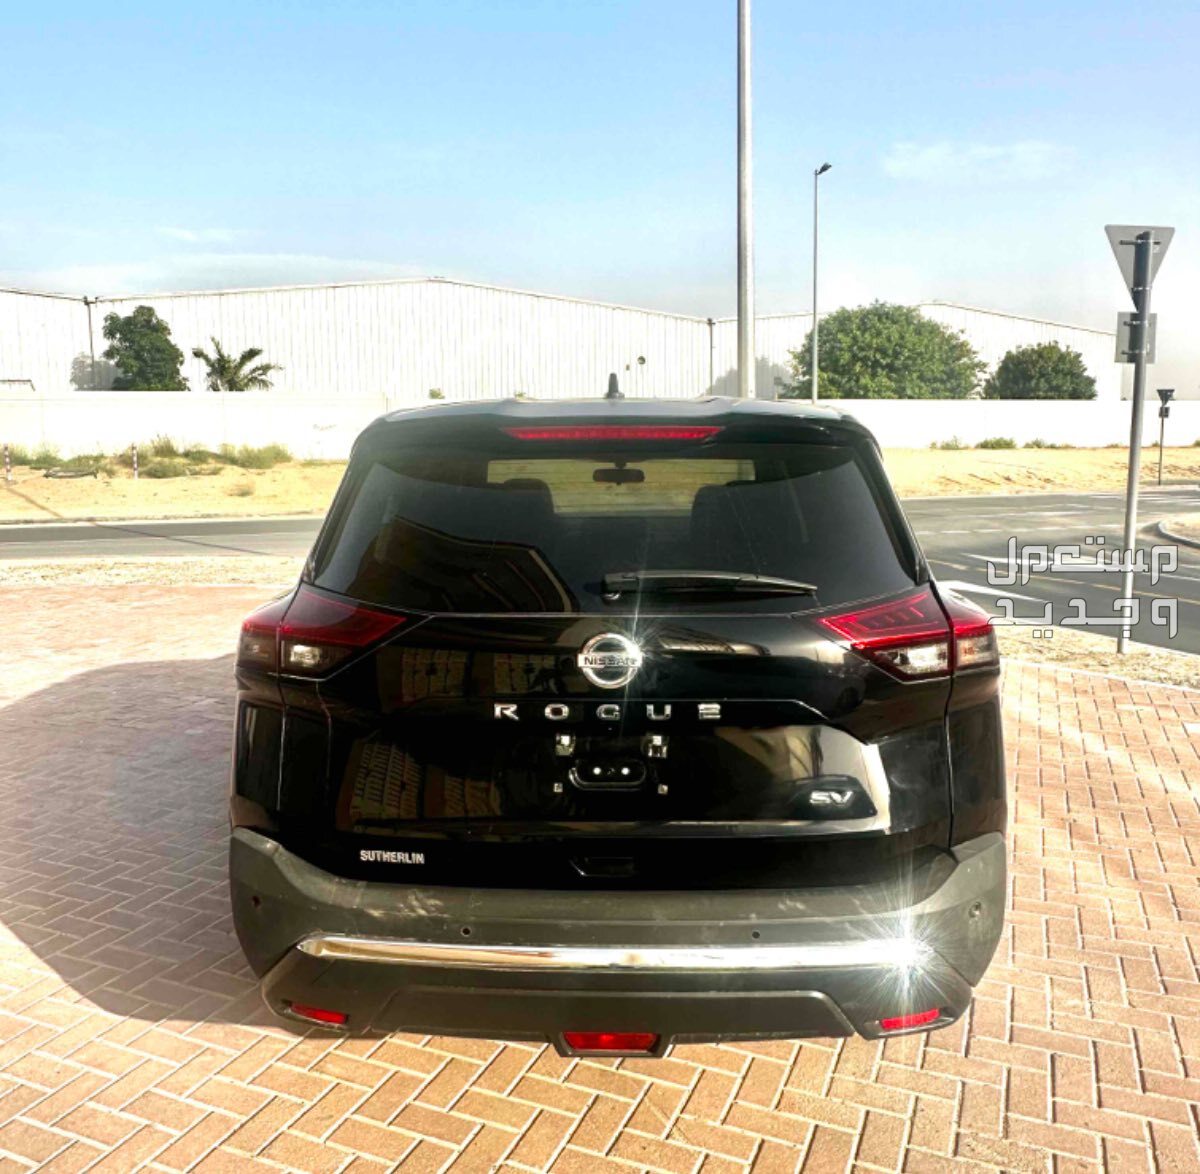 Nissan Rogue 2021 in Dubai at a price of 53 thousands AED